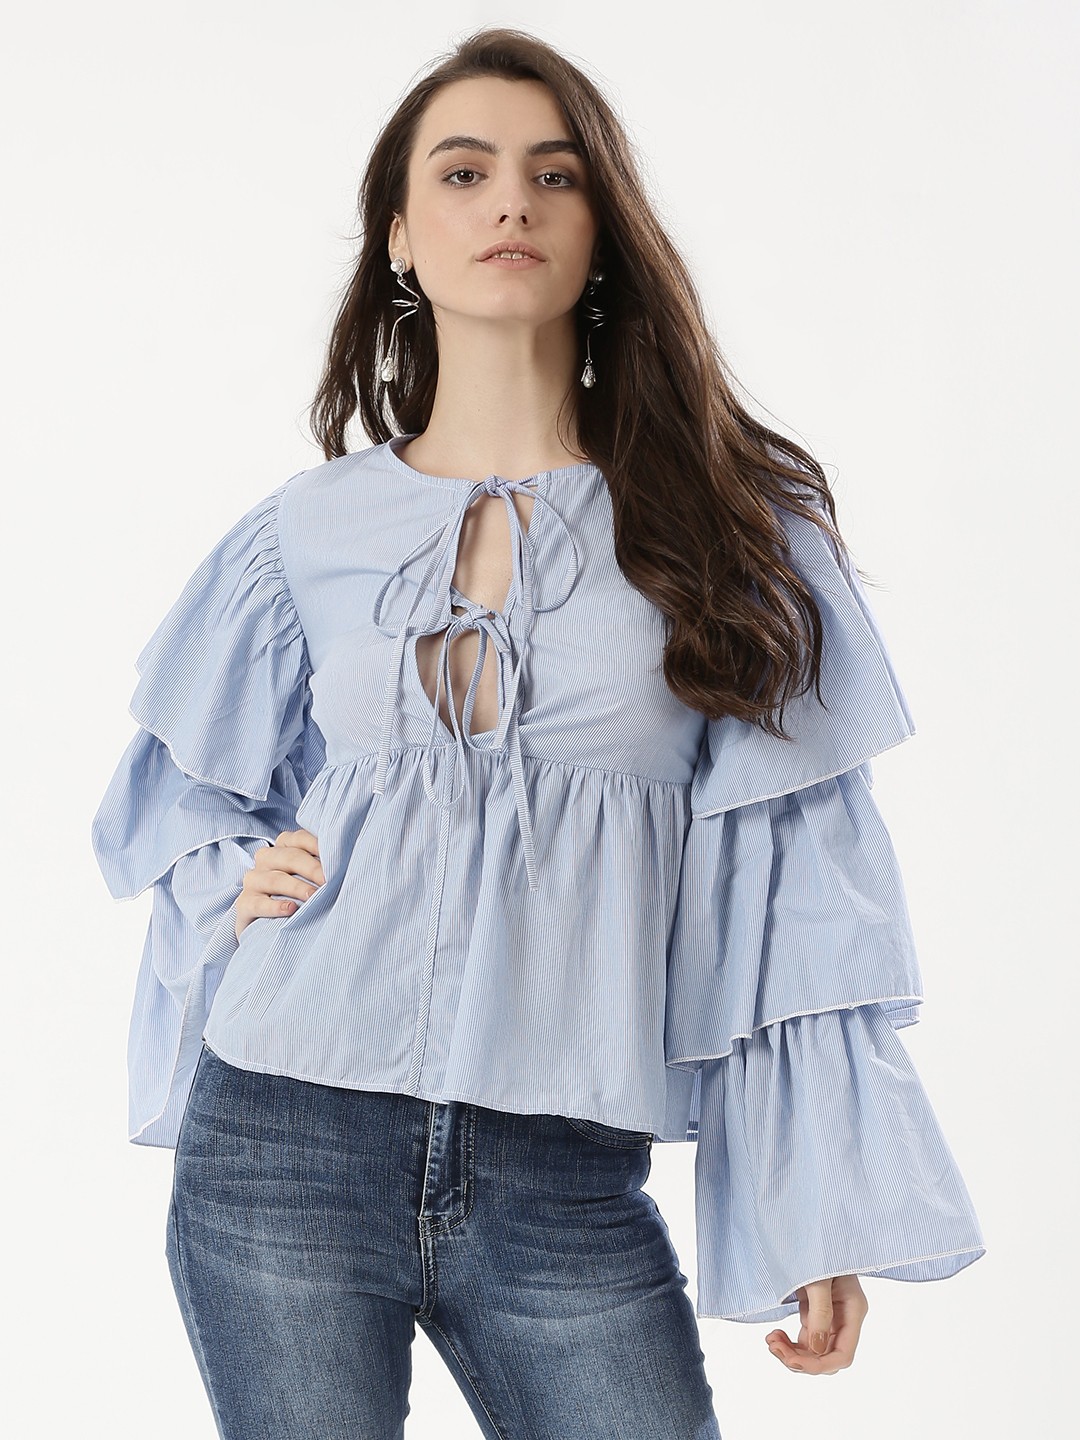 Statement Sleeves Blouse